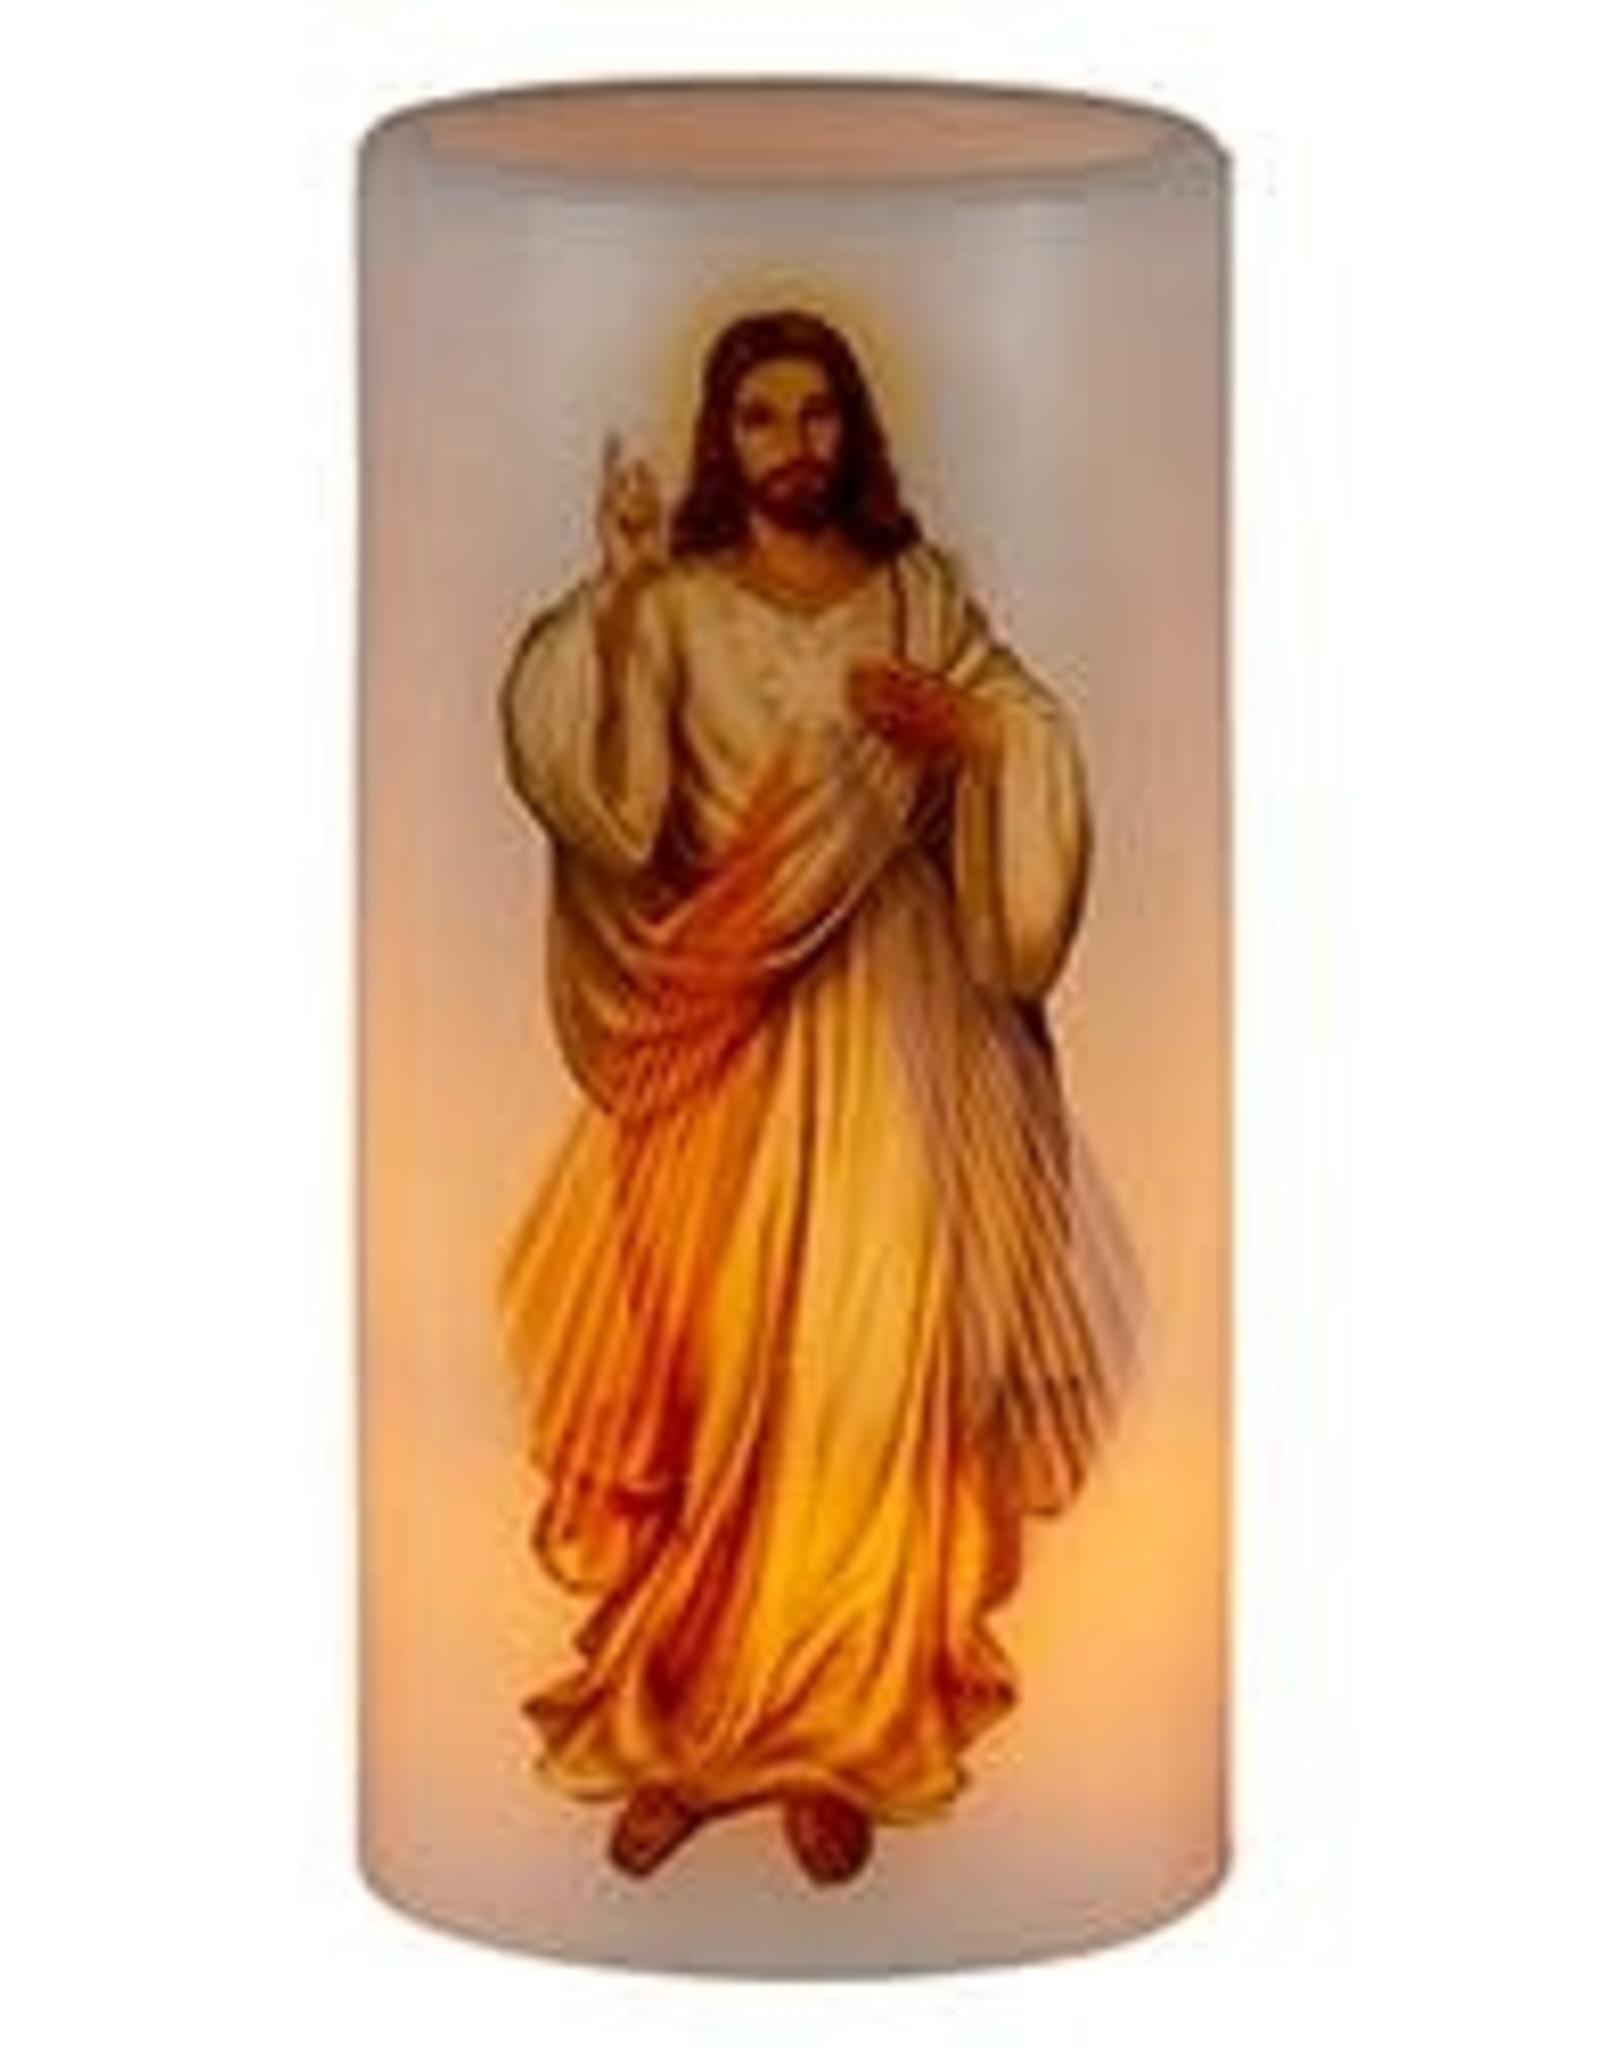 Divine Mercy Flickering Flameless Devotional Candle